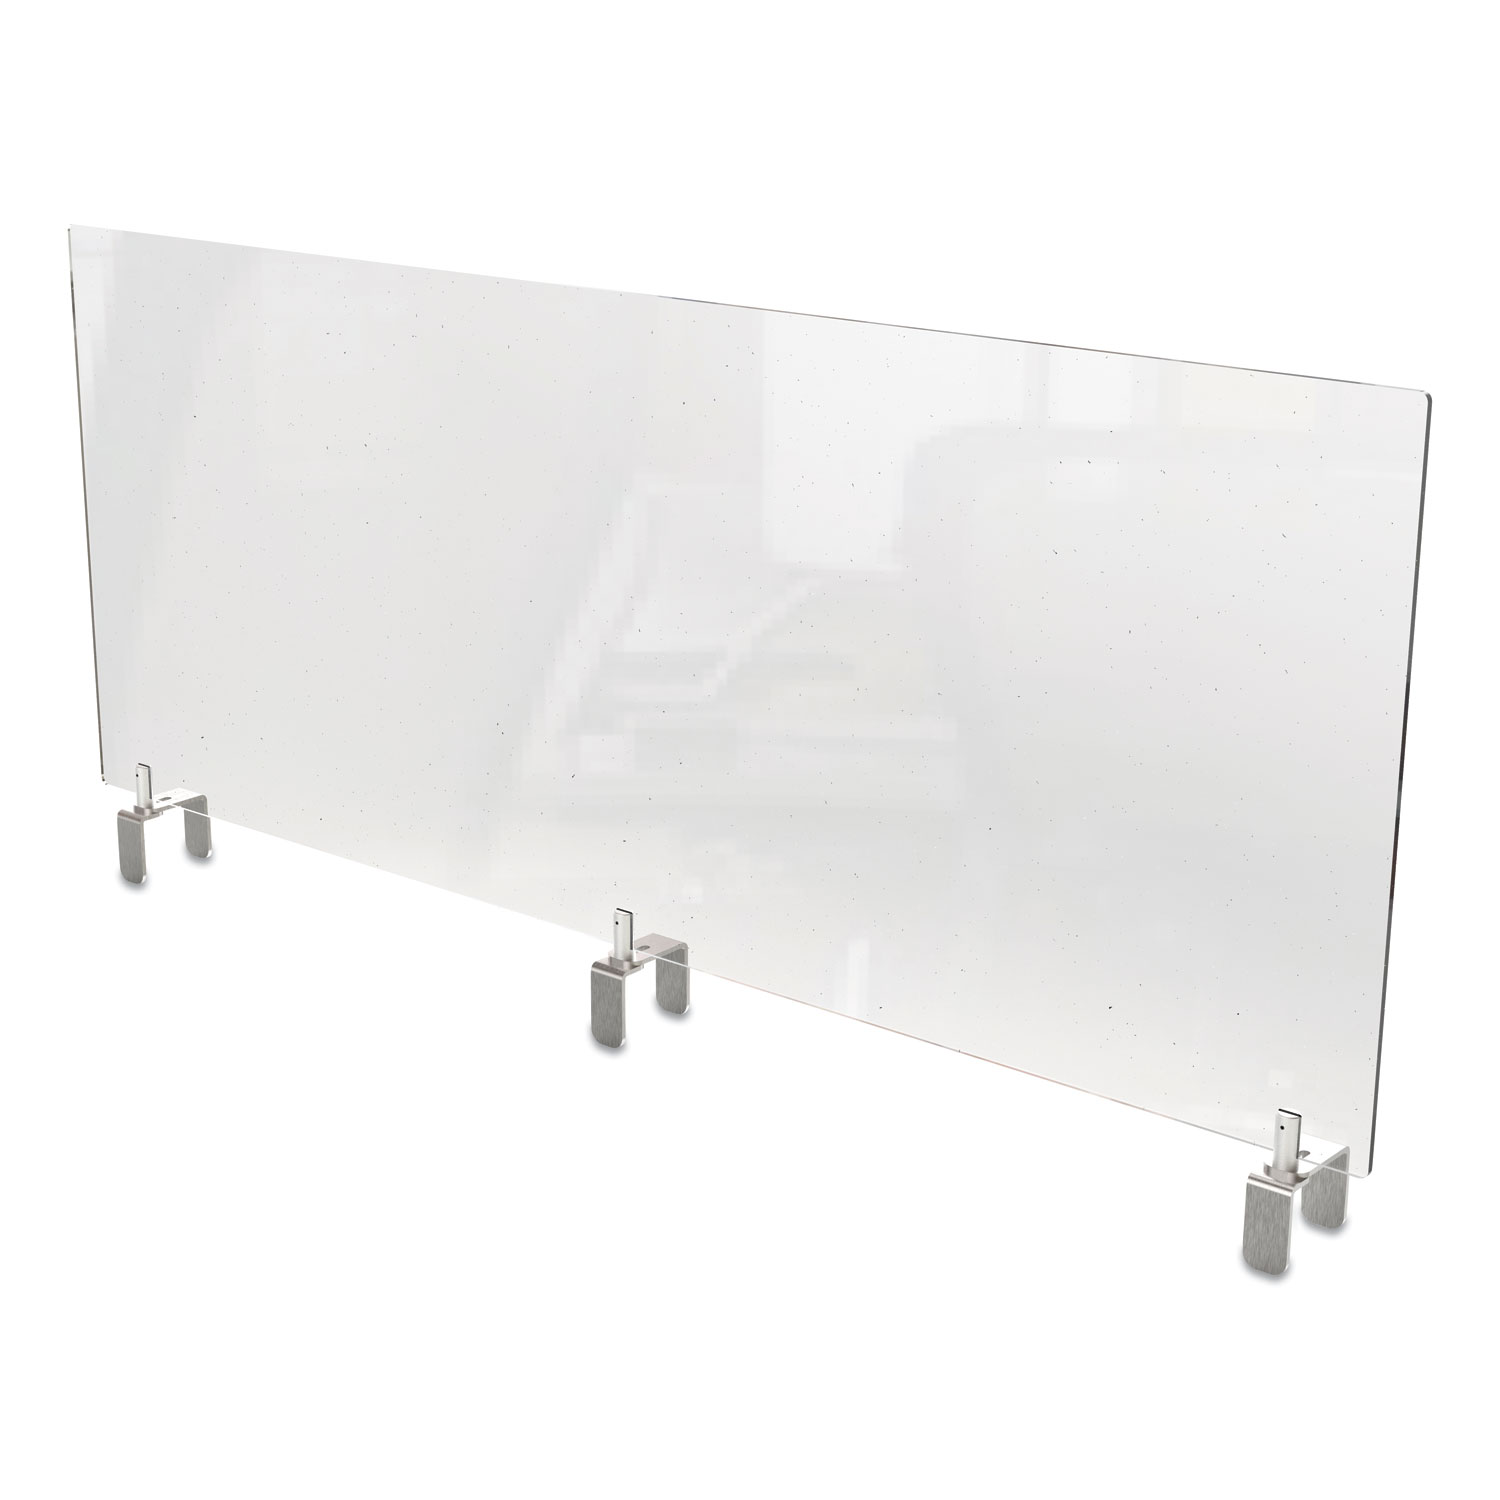  Ghent PEC1848-A Clear Partition Extender with Attached Clamp, 48 x 3.88 x 18, Thermoplastic Sheeting (GHEPEC1848A) 